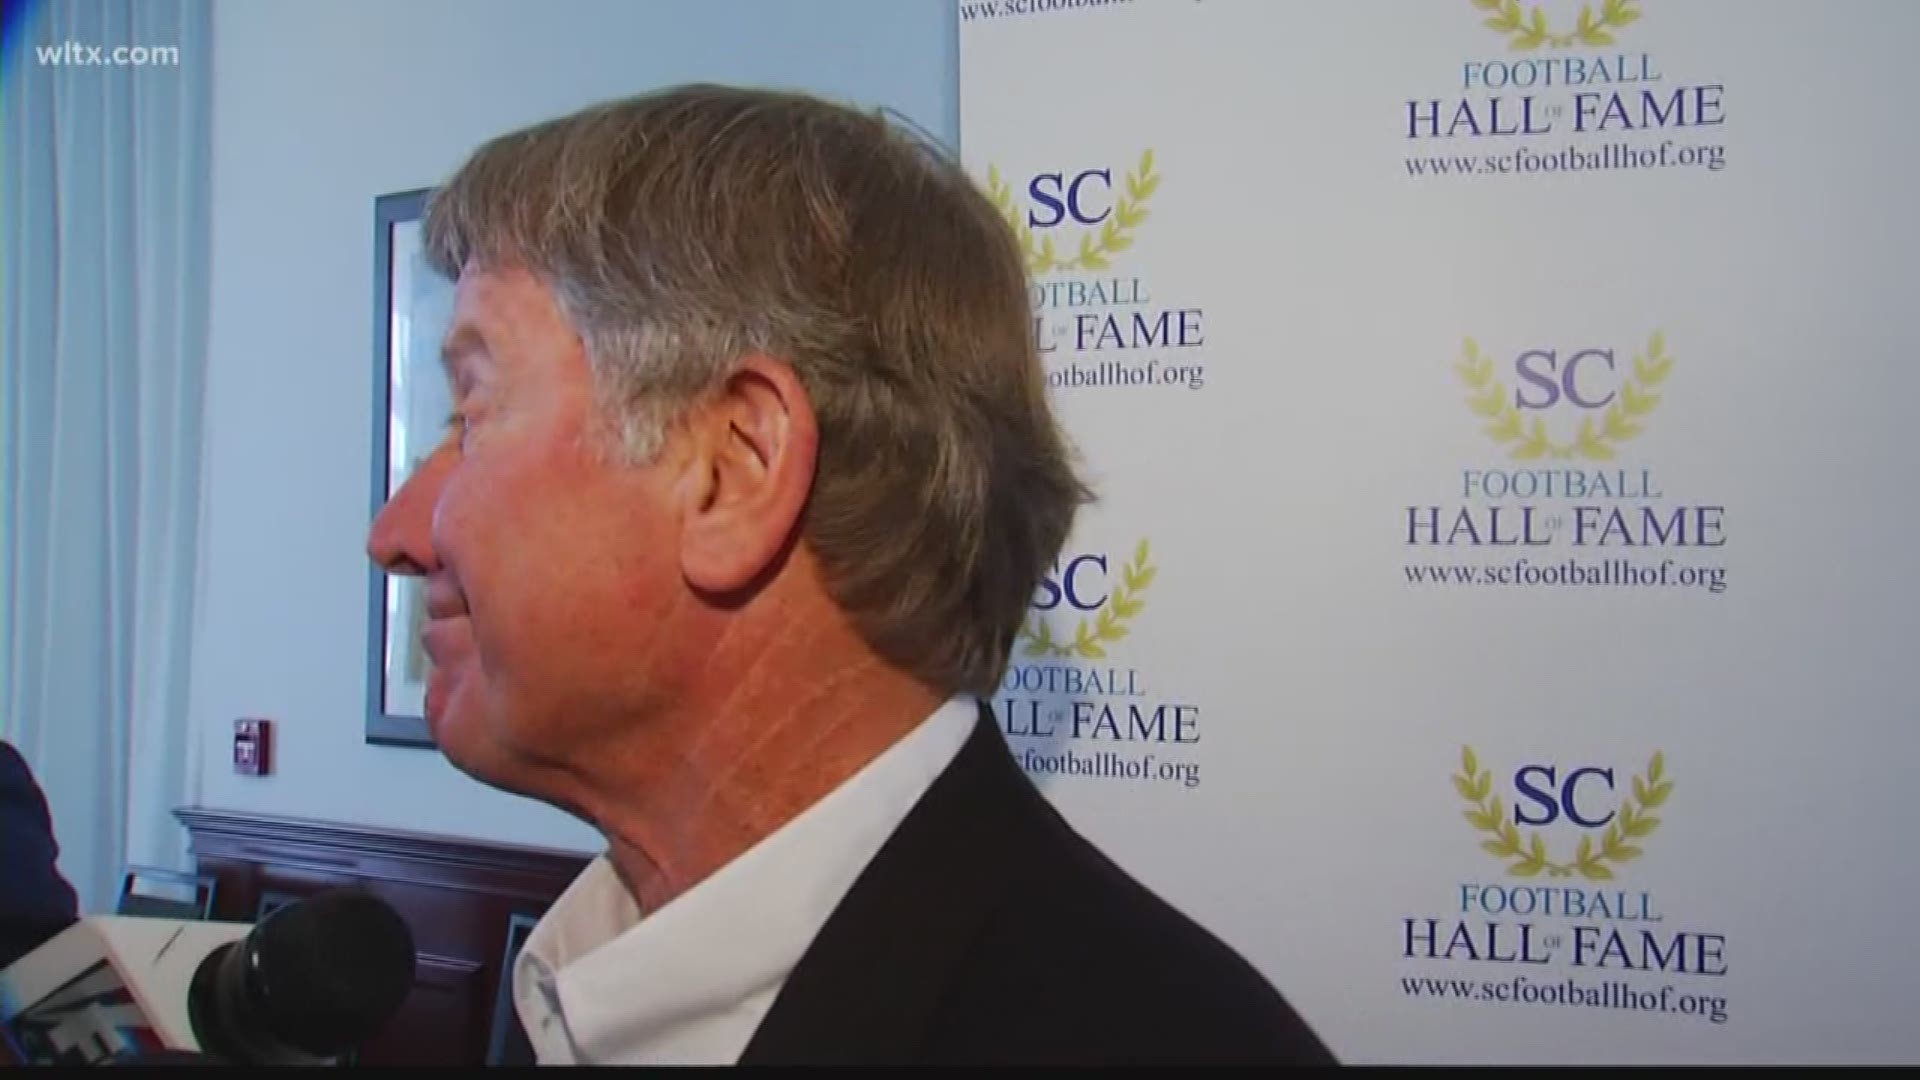 The HBC will be coaching again in 2019 in a new pro league. But it's in college where he is a Hall of Famer and he does admit he misses being in that environment.